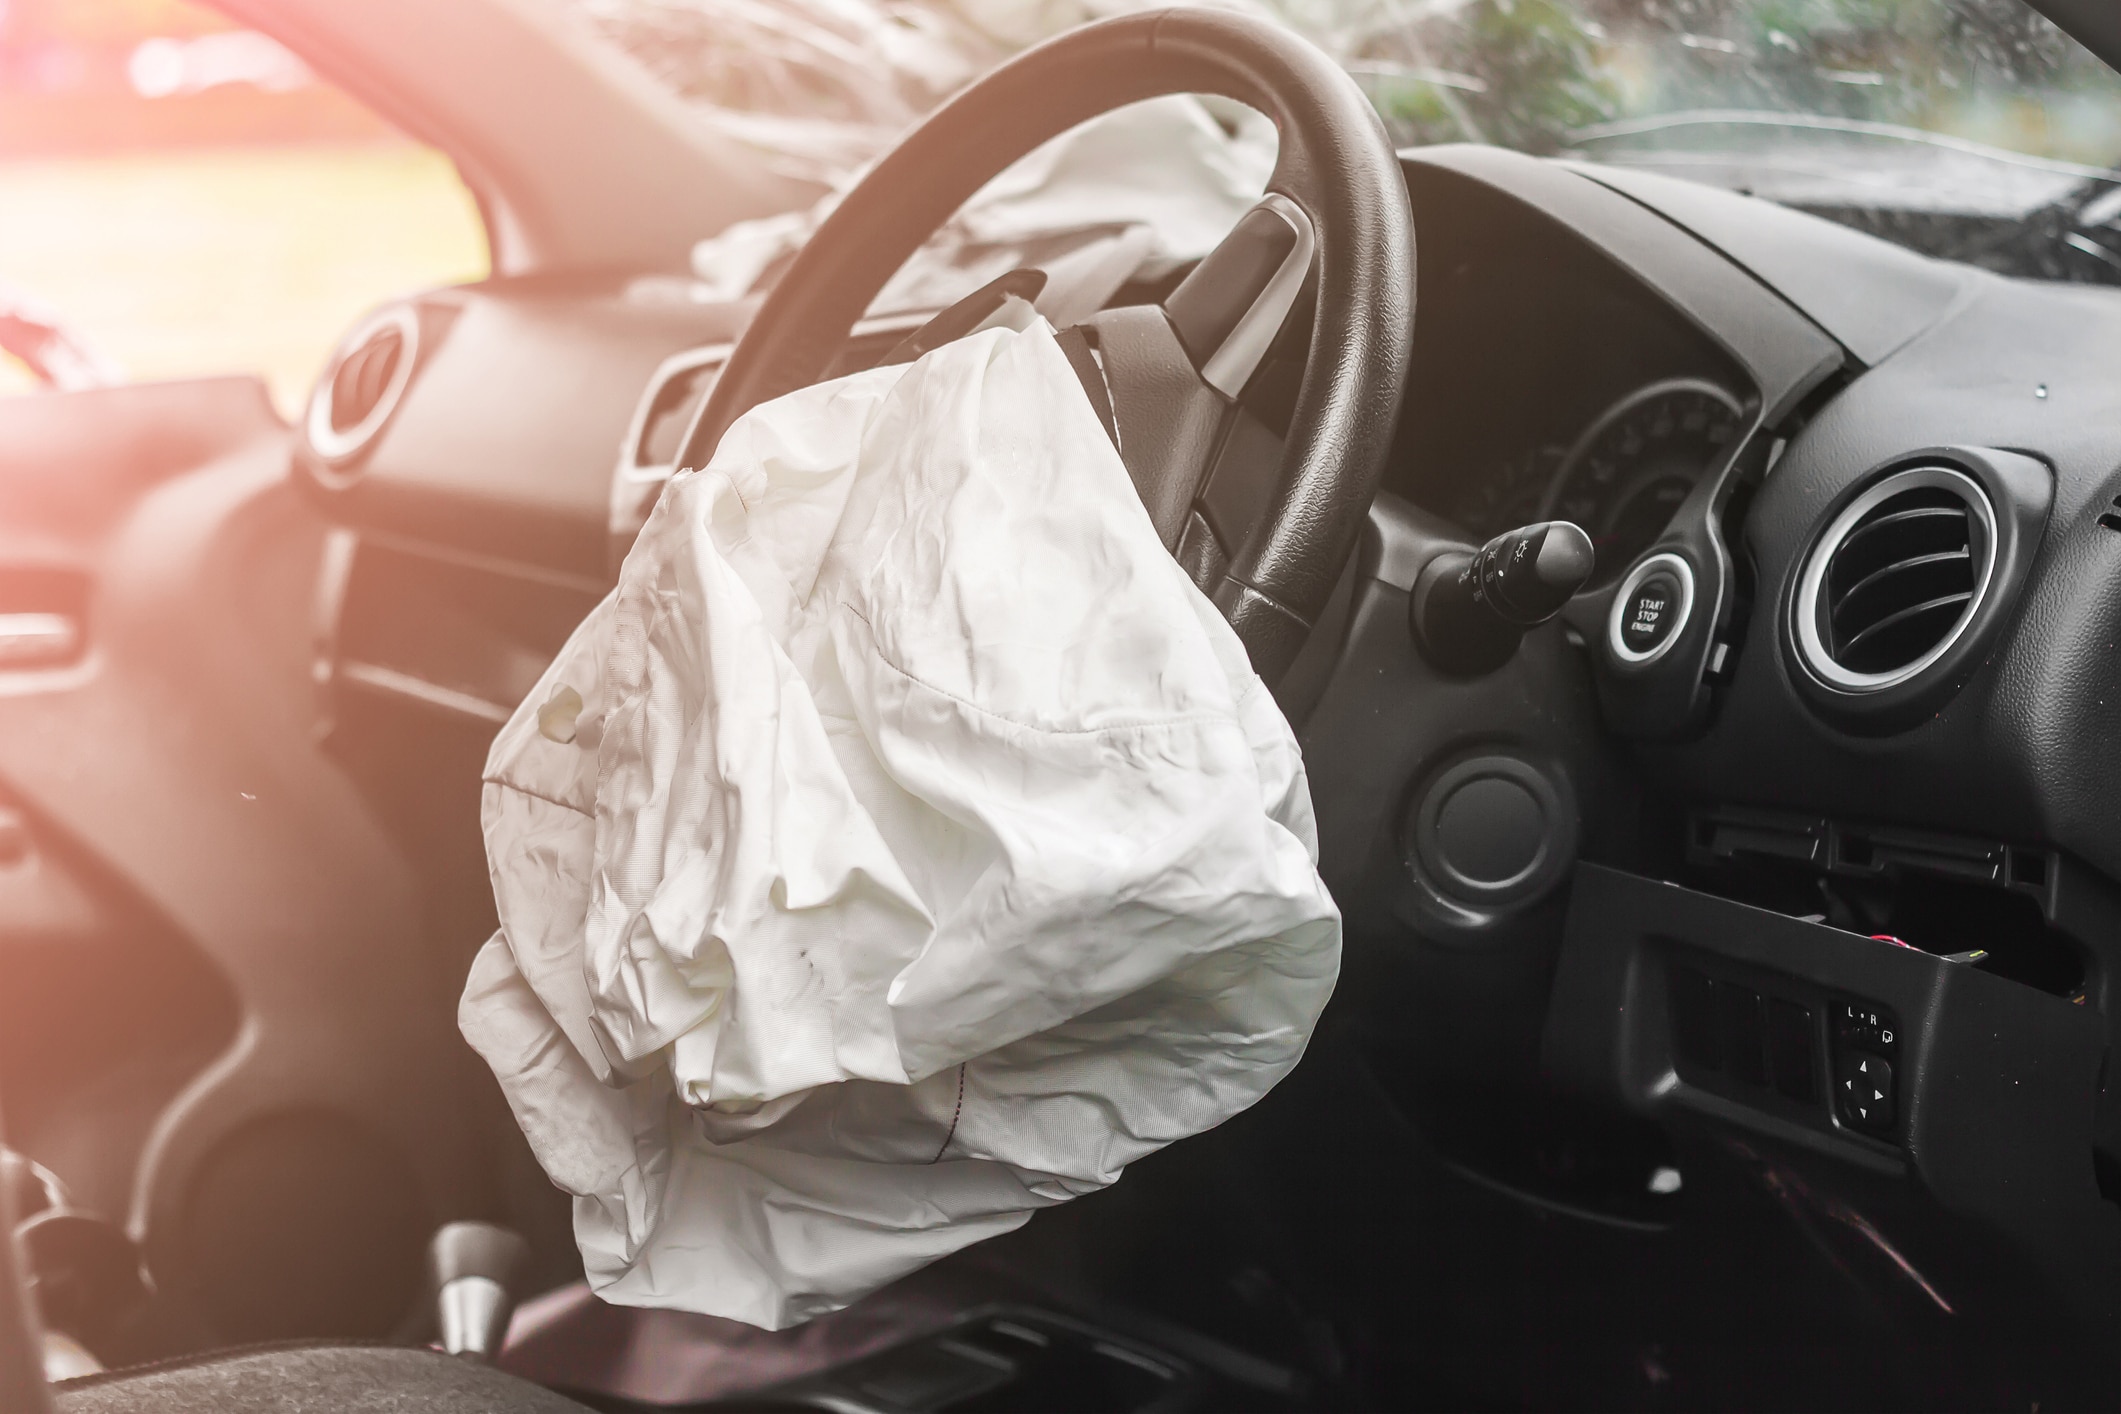 If Airbags Did Not Deploy in a Car Accident, is the Car Company Liable